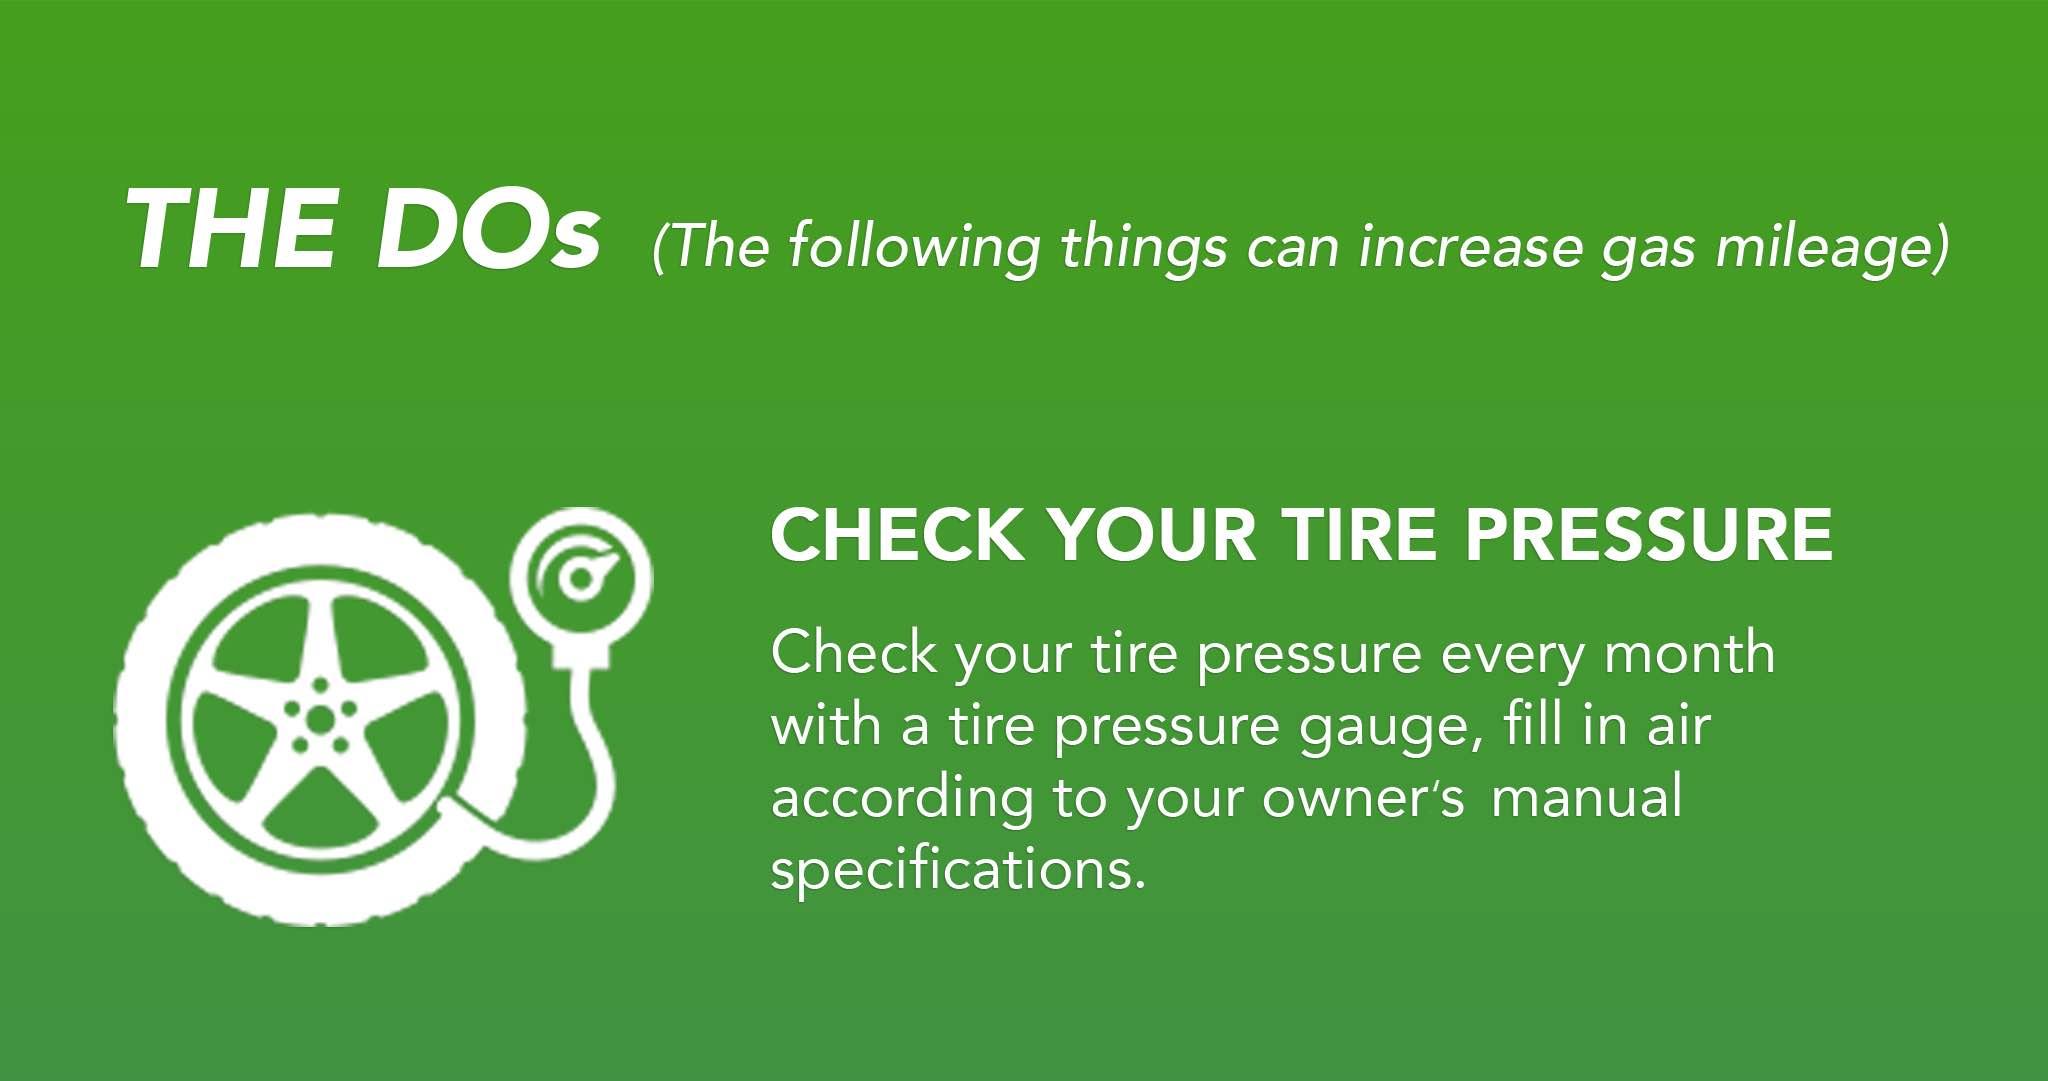 Check your tire pressure every month with a tire pressure gauge, fill in air according to your owners manual  specifications.